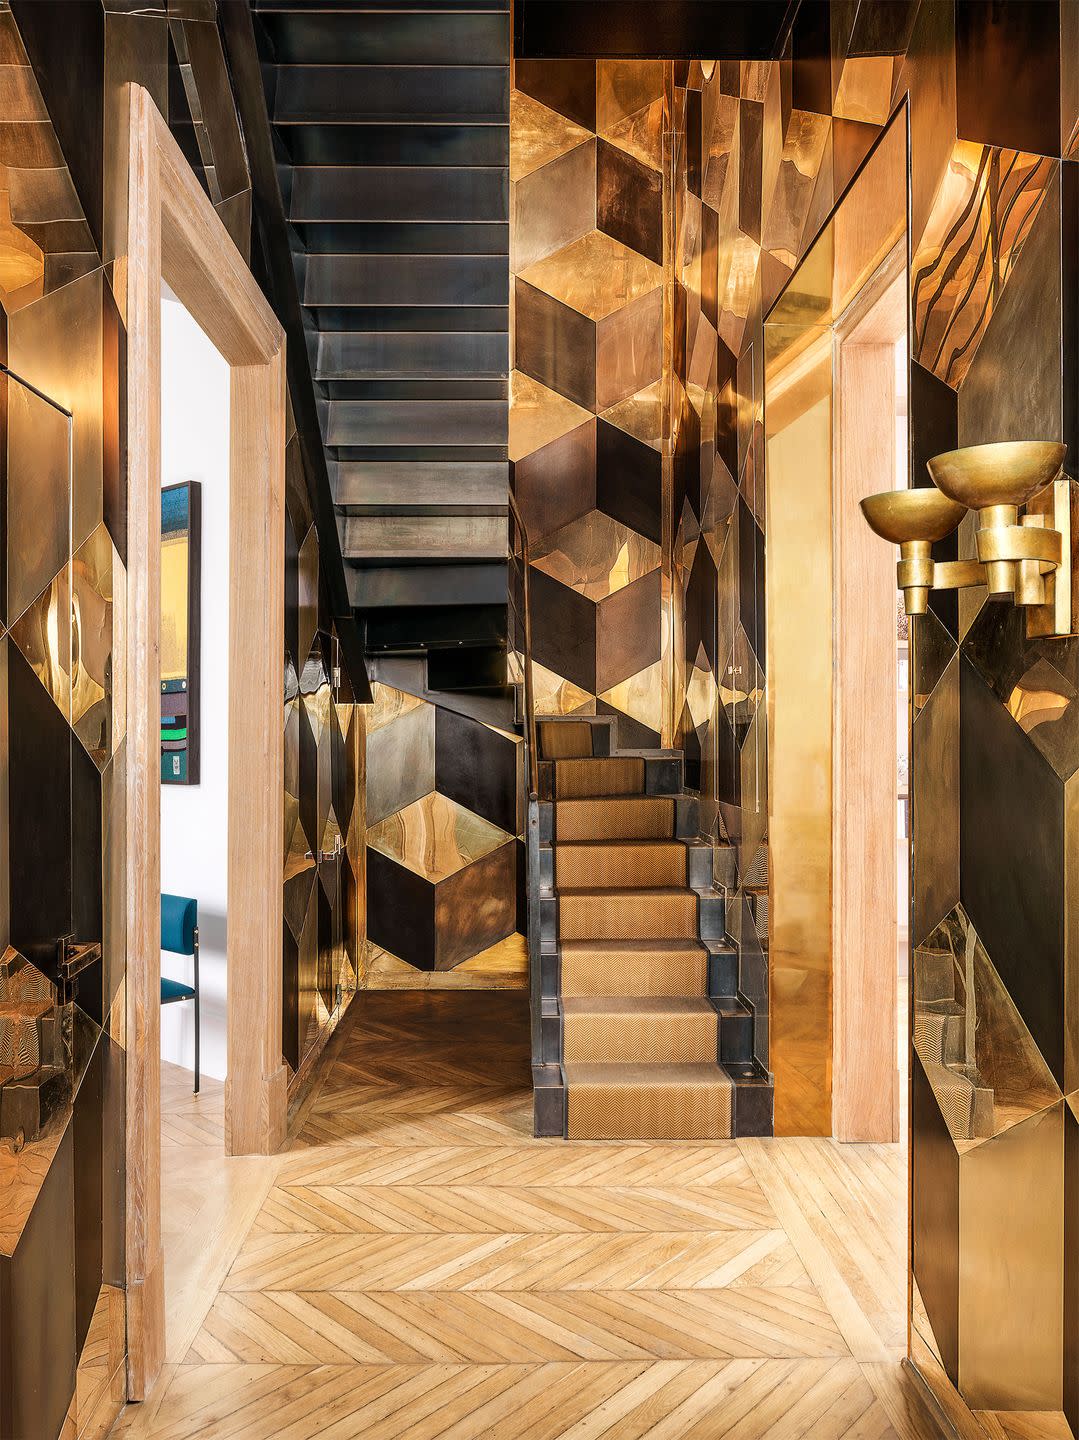 a stair hall has walls sheathed in polished and patinated brass plate in an interlocking cube pattern, two brass sconces, wood floor in a chevron pattern